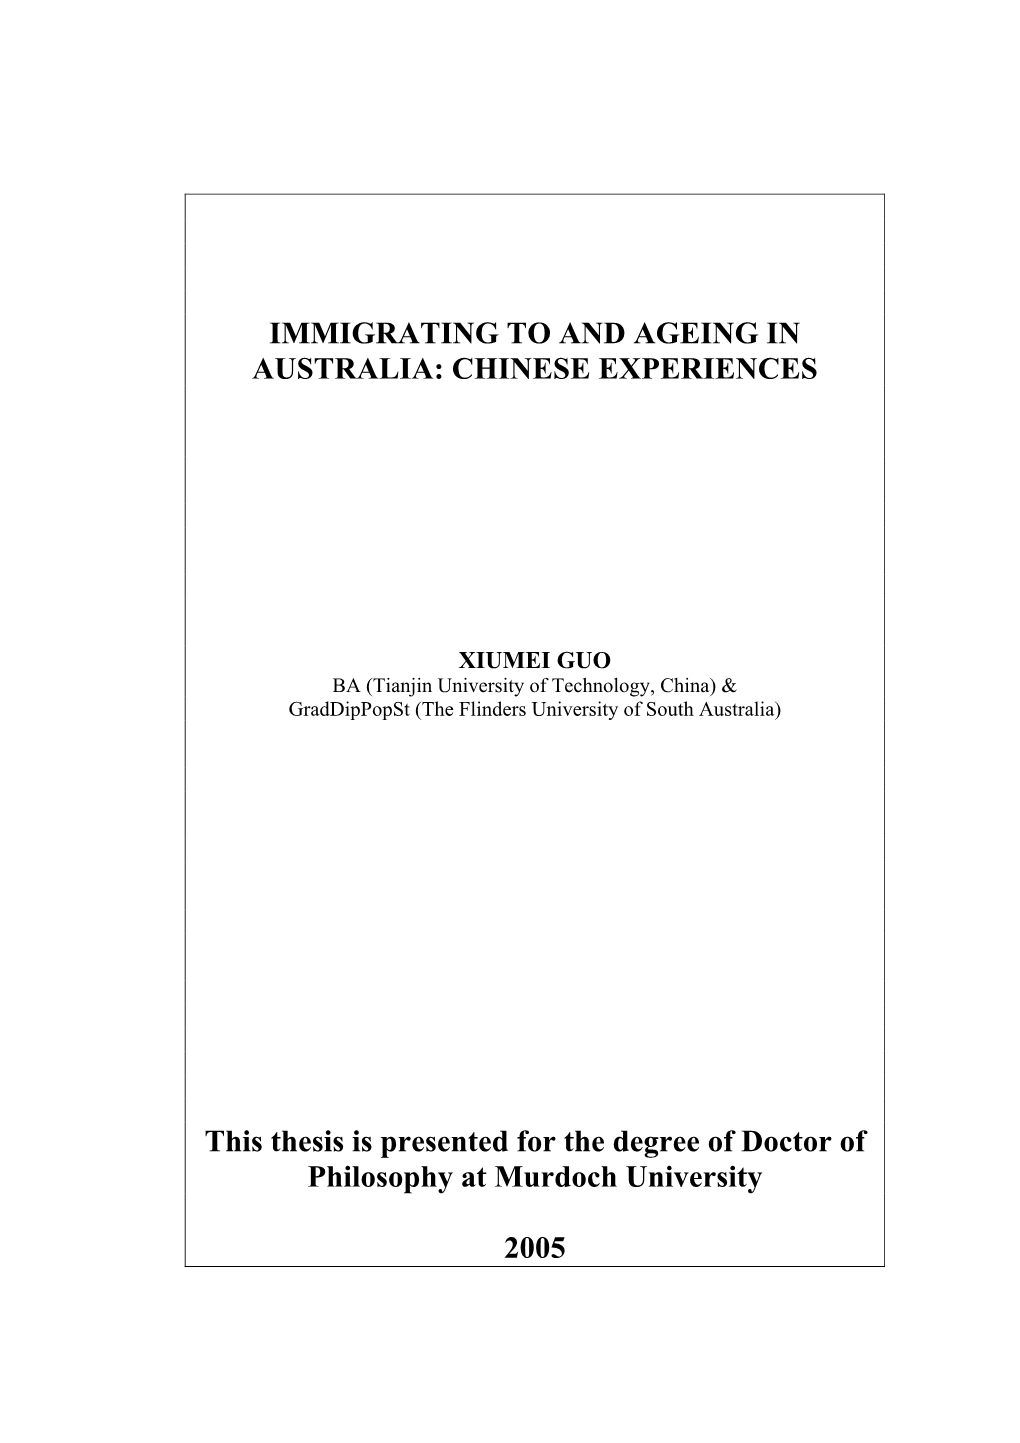 IMMIGRATING to and AGEING in AUSTRALIA: CHINESE EXPERIENCES This Thesis Is Presented for the Degree of Doctor of Philosophy at M